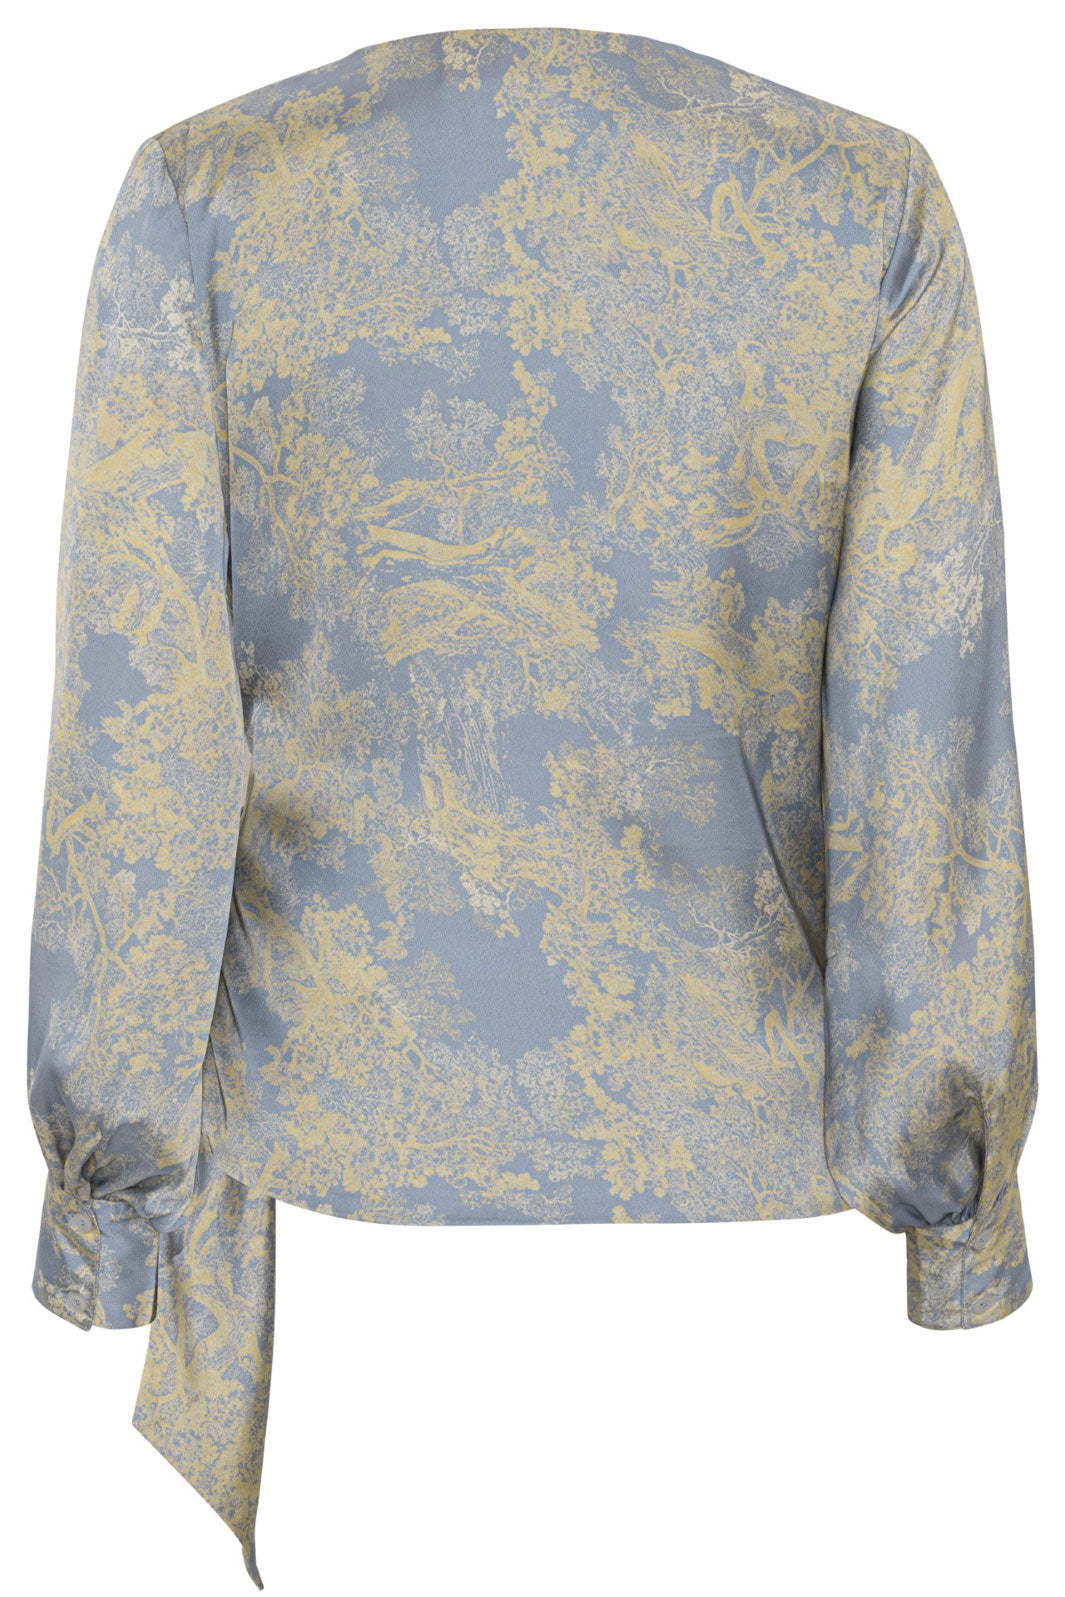 Karmamia - Ines Blouse - Sky Forest Bluser 